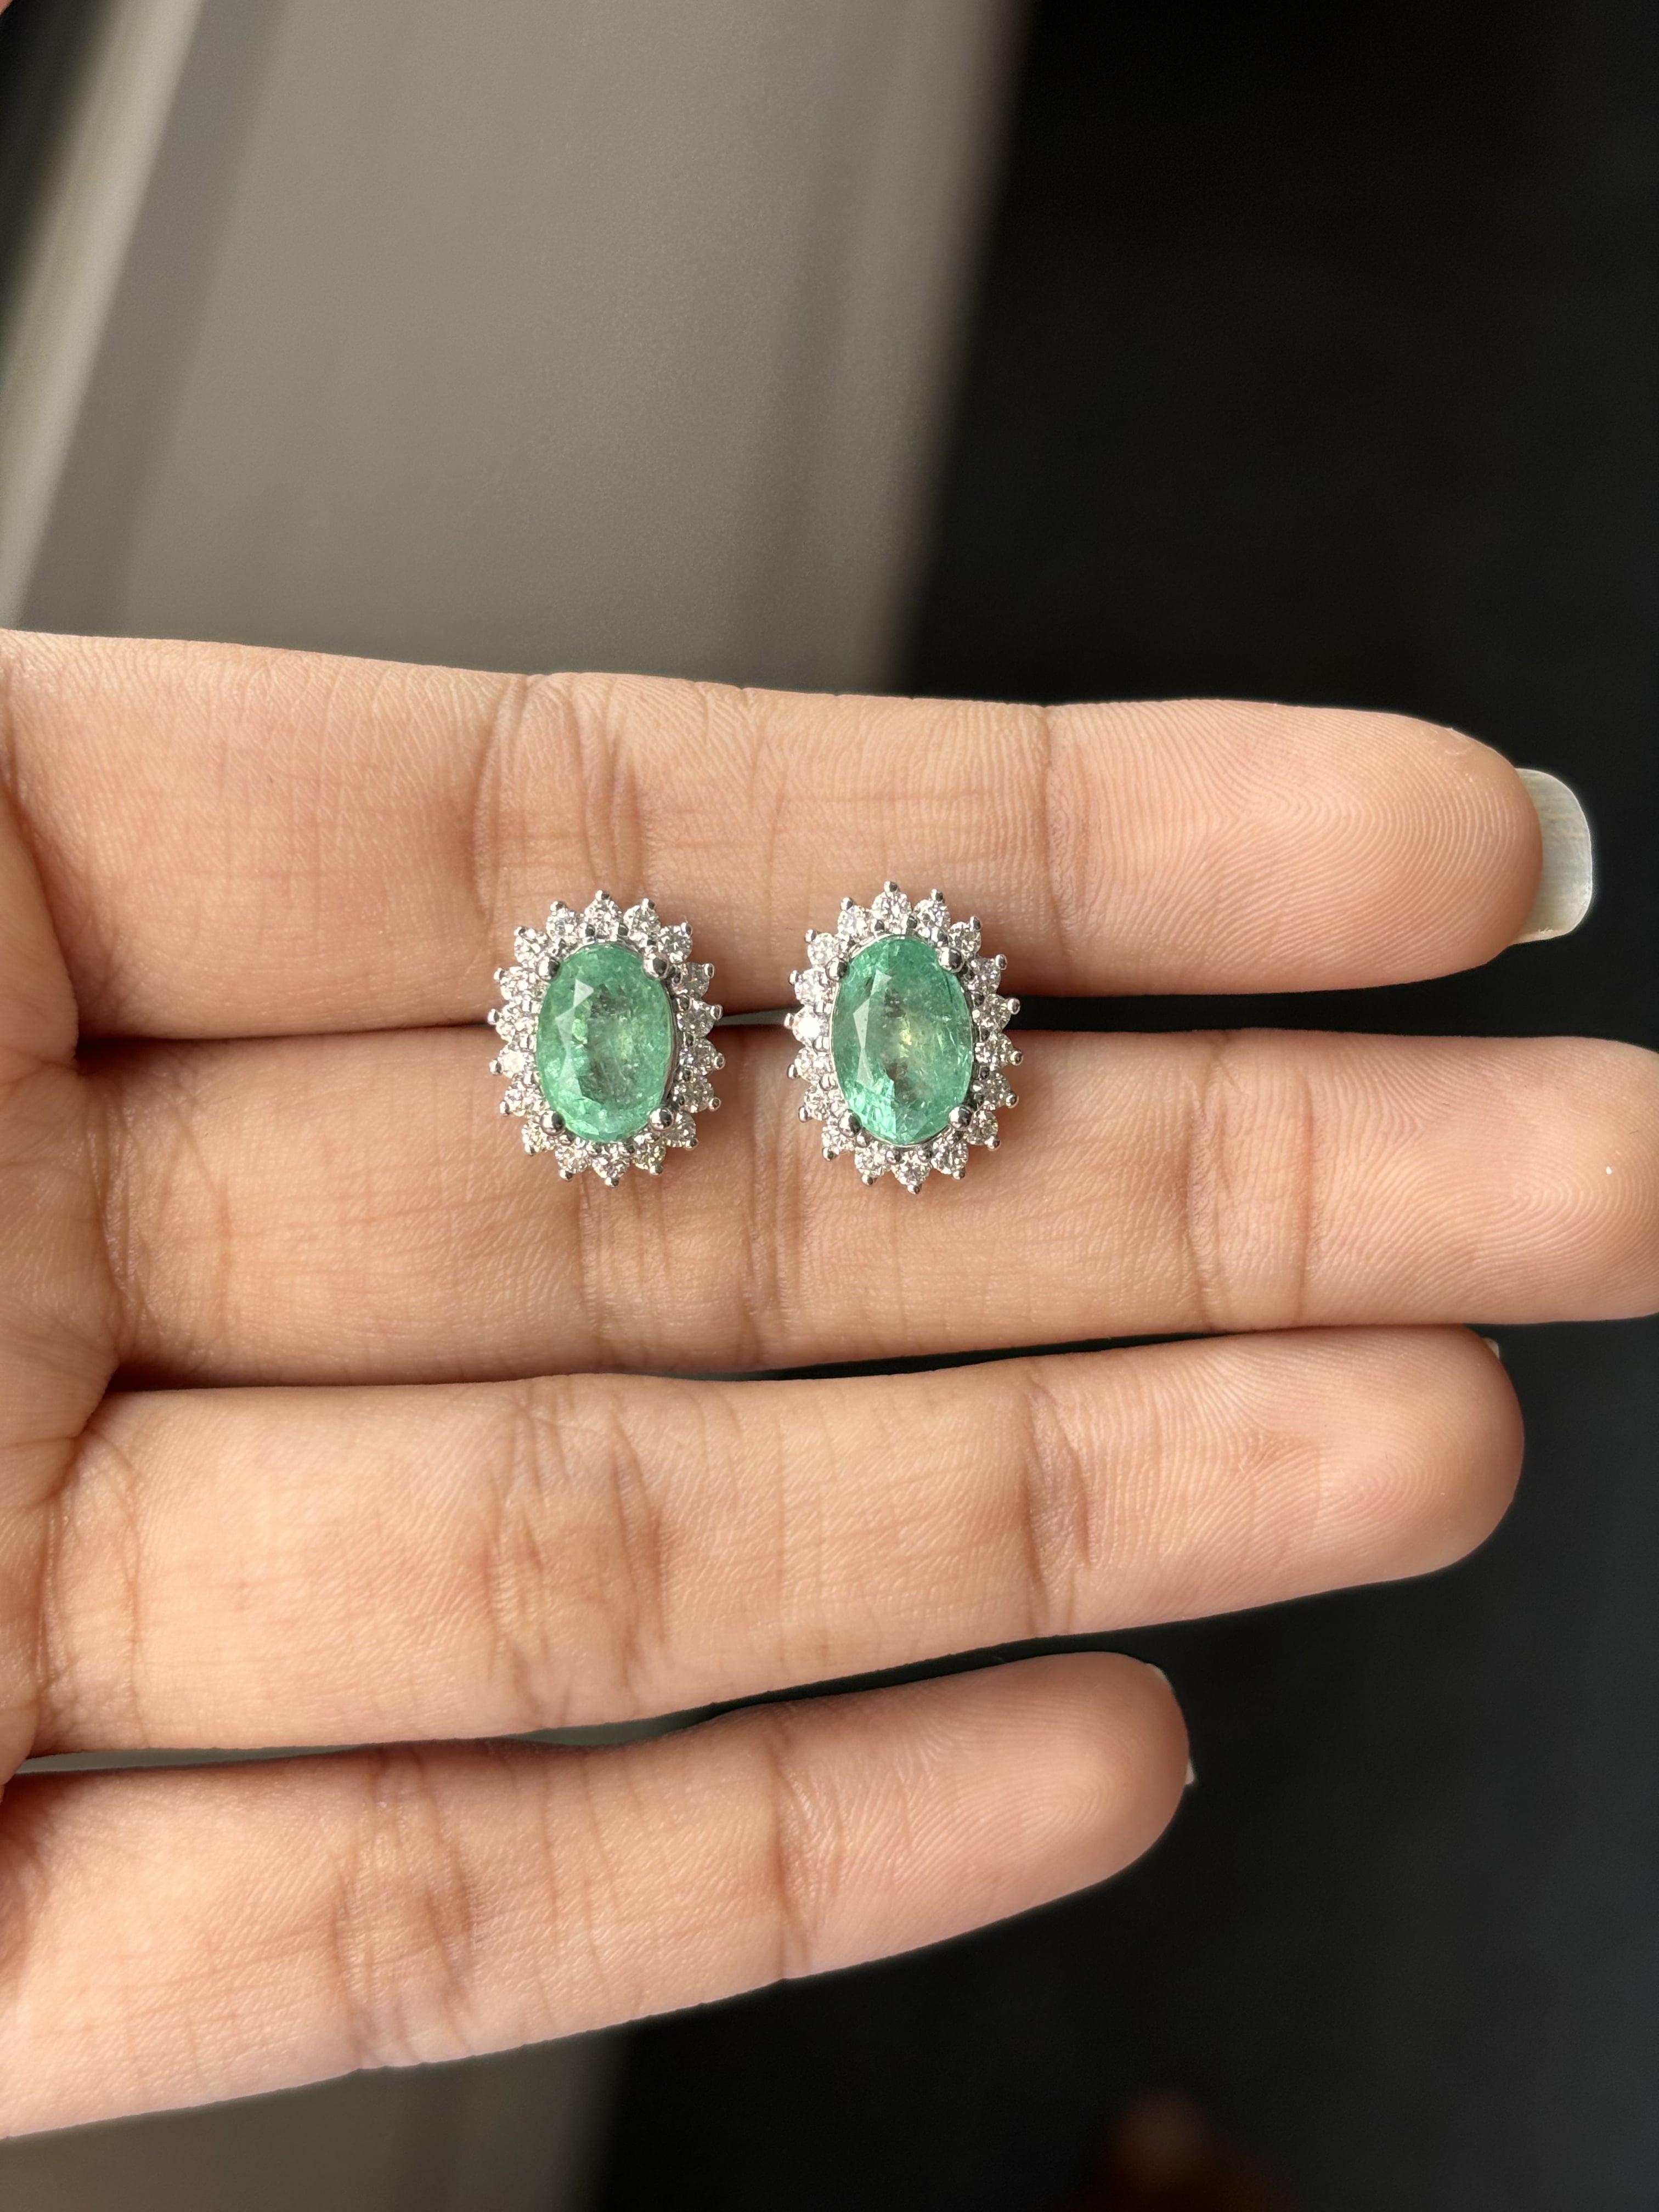  2.96 Carat Emerald Stud Earrings with Natural Diamonds in 18K White Gold  For Sale 3